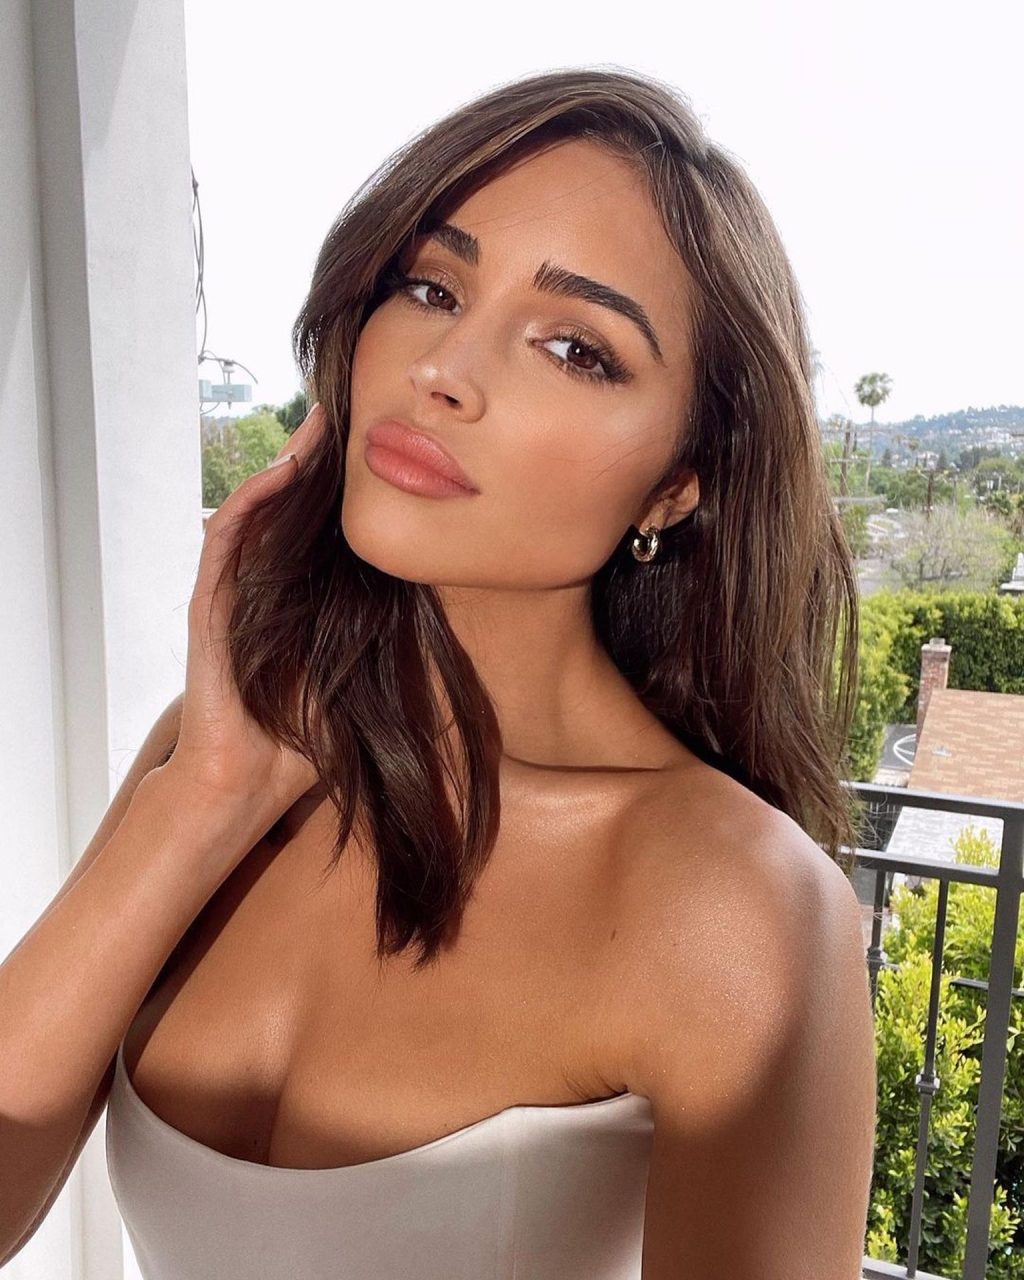 Olivia Culpo Looks Stunning in a White Top Beverly Hills (17 Photos)